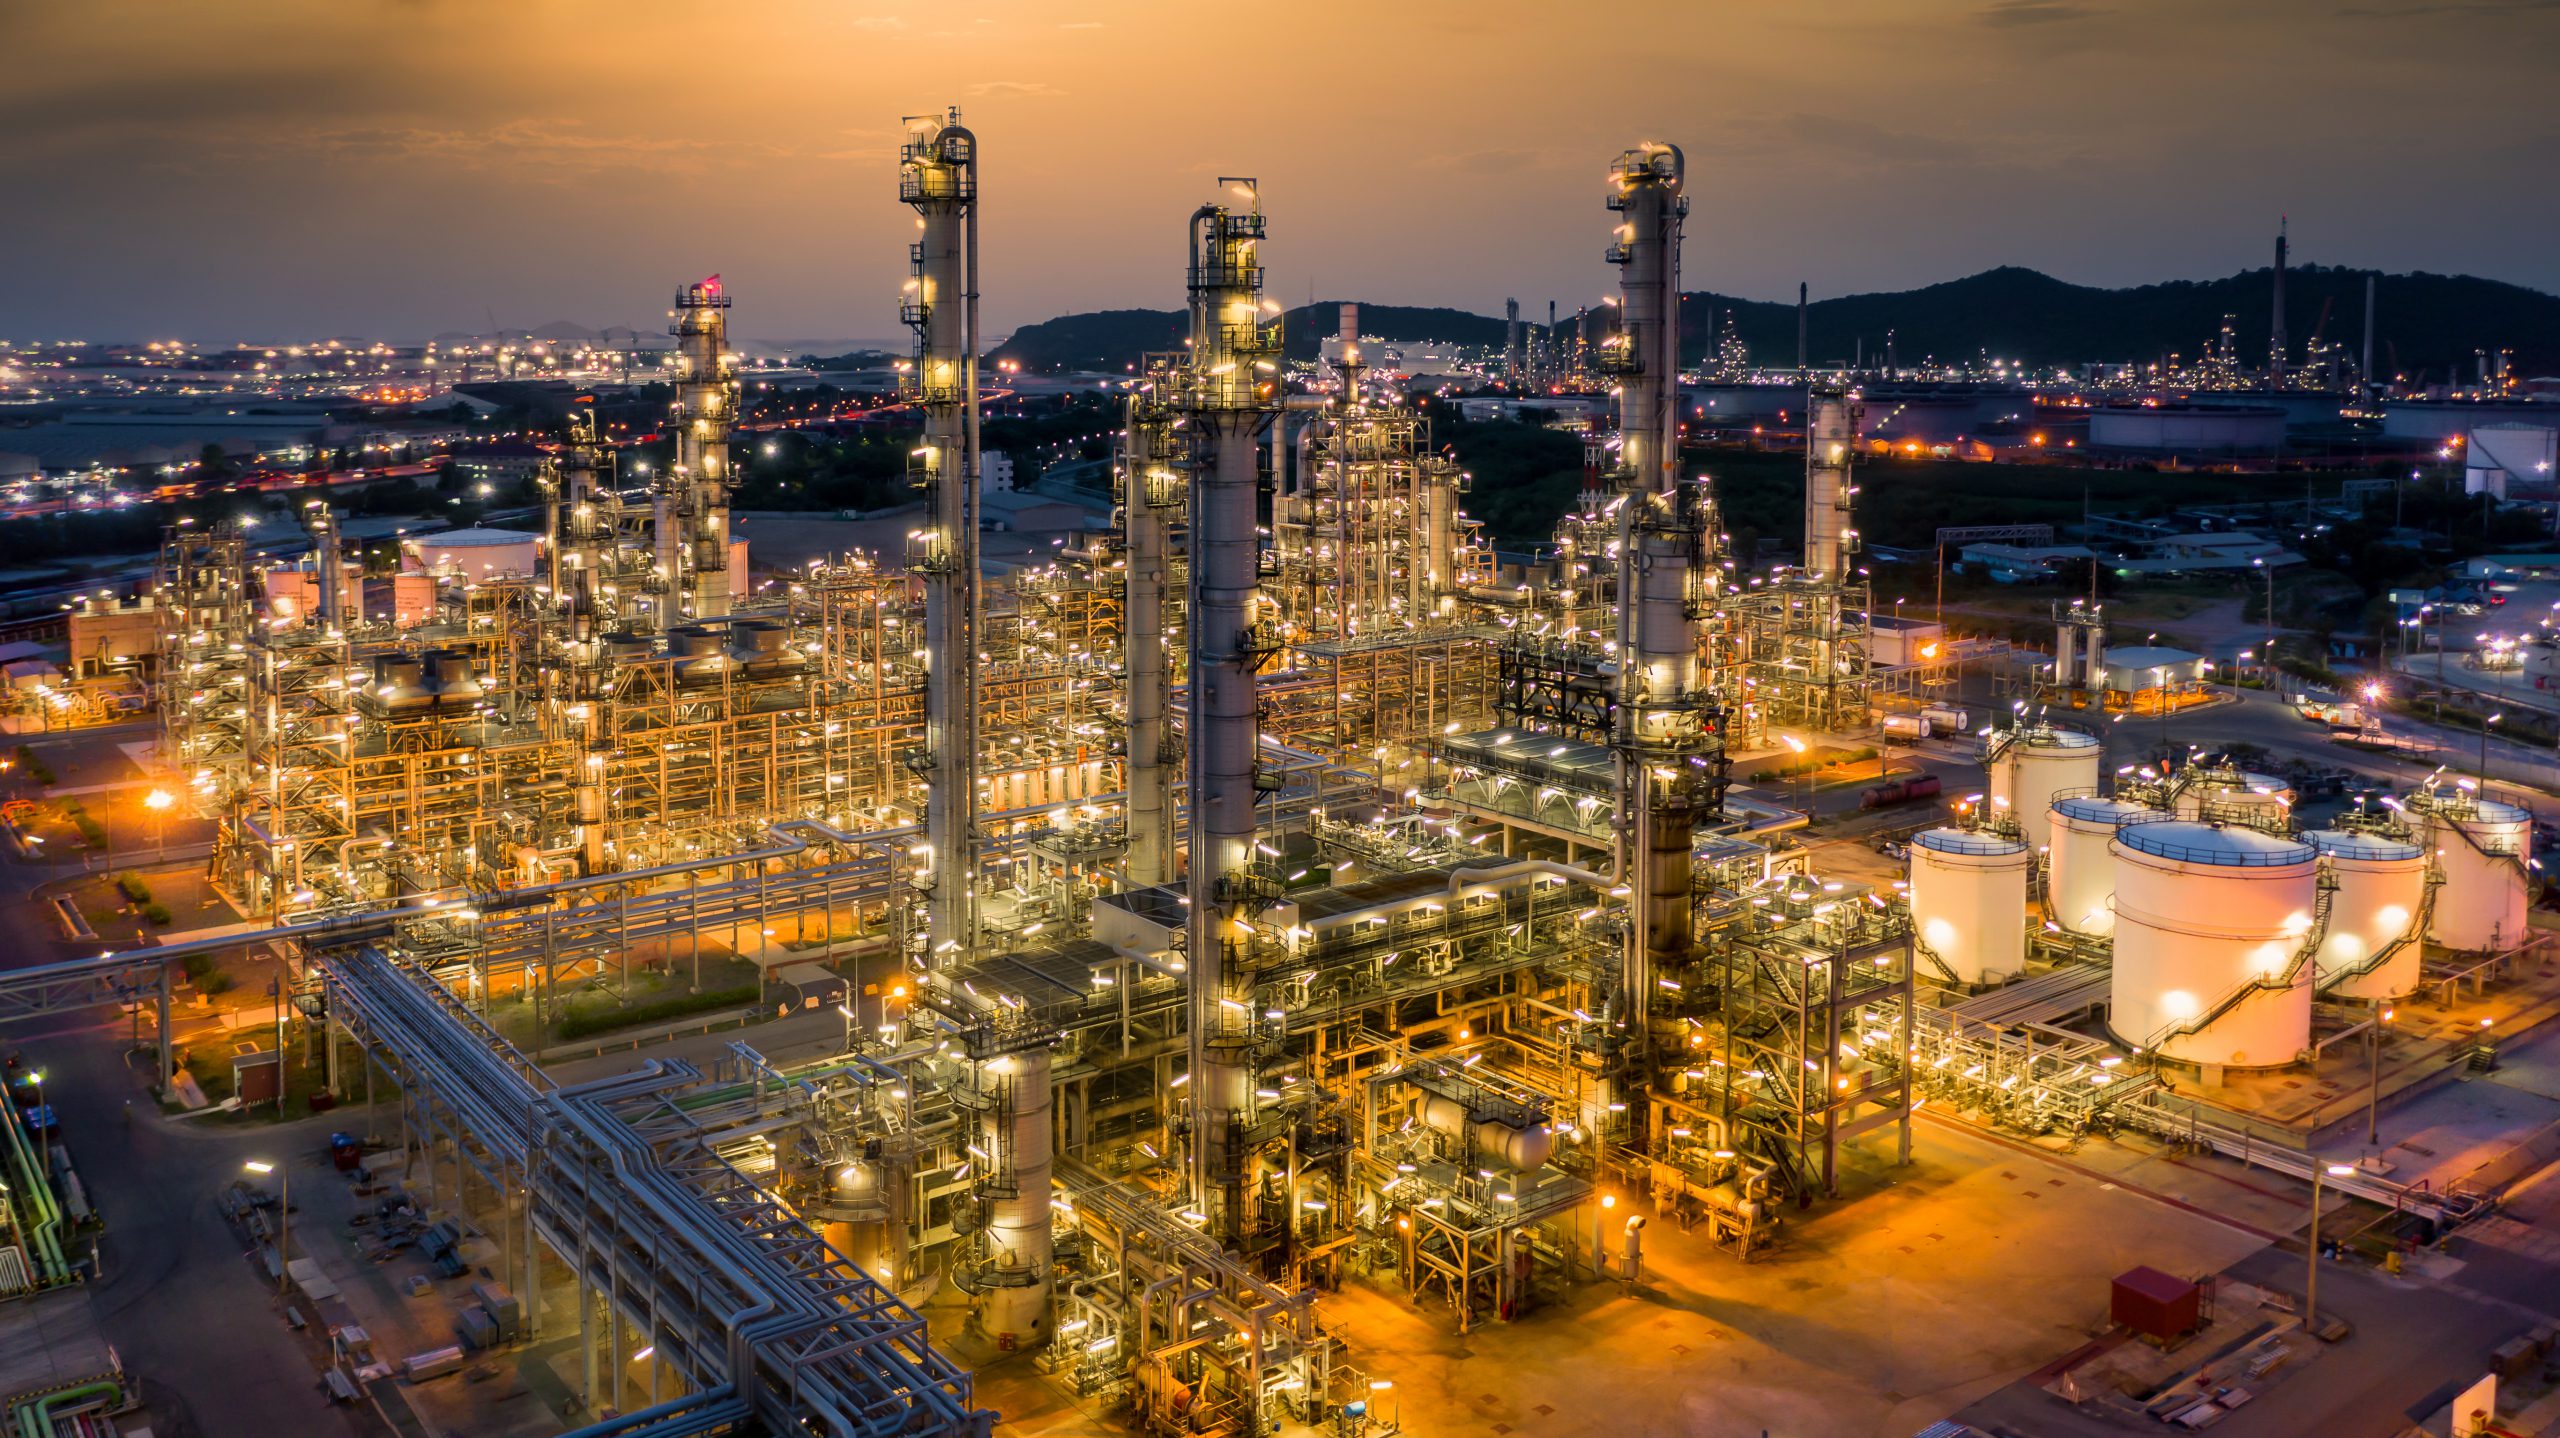 Aerial view of oil refinery plant at dusk illuminated by yellow lights